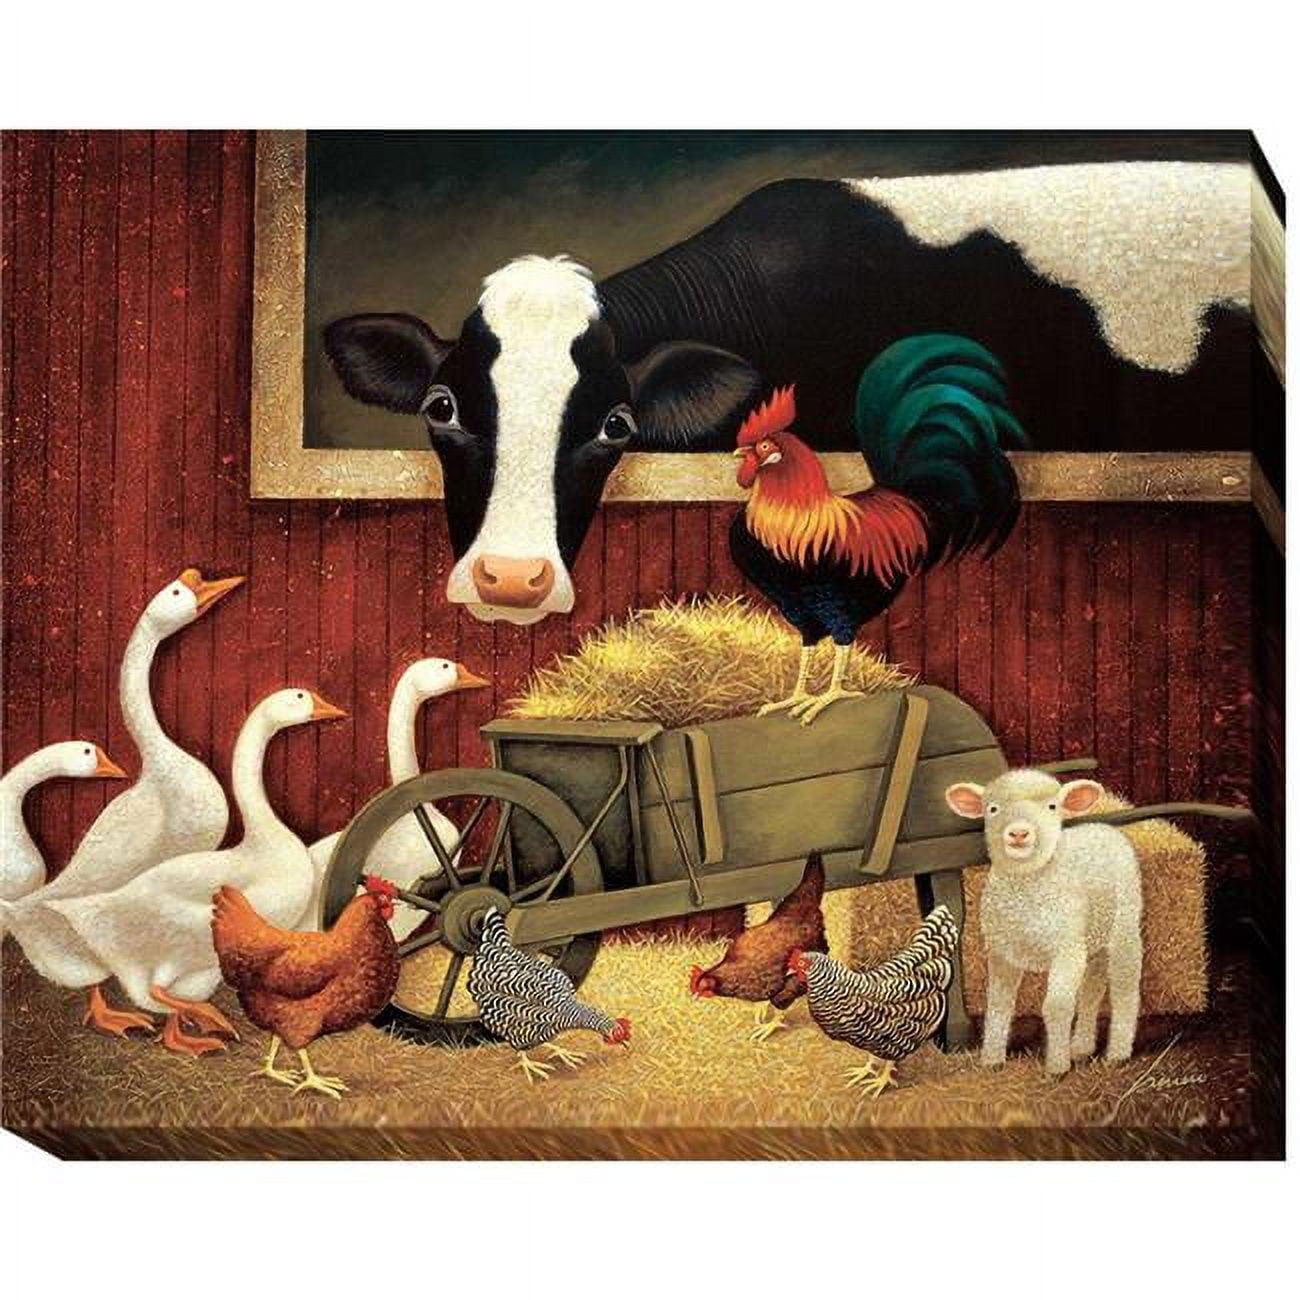 3240p758ig All My Friends By Lowell Herrero Premium Oversize Gallery-wrapped Canvas Giclee Art - 32 X 40 X 1.5 In.